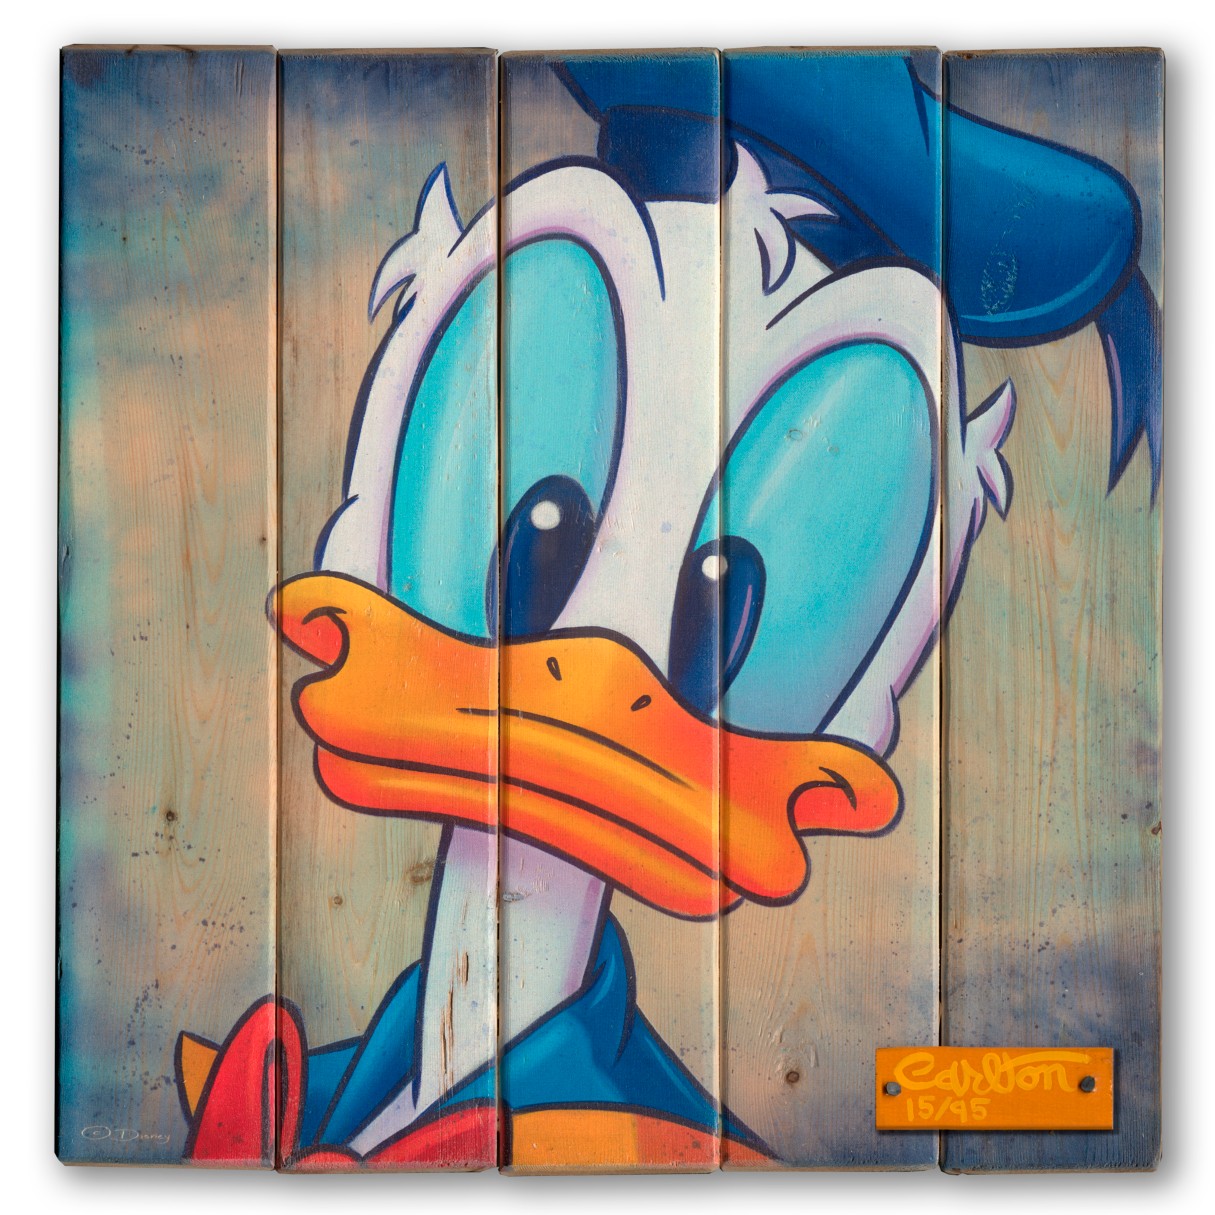 Donald Duck ''The Eyes Have It'' Signed Giclée on Wood by Trevor Carlton – Limited Edition